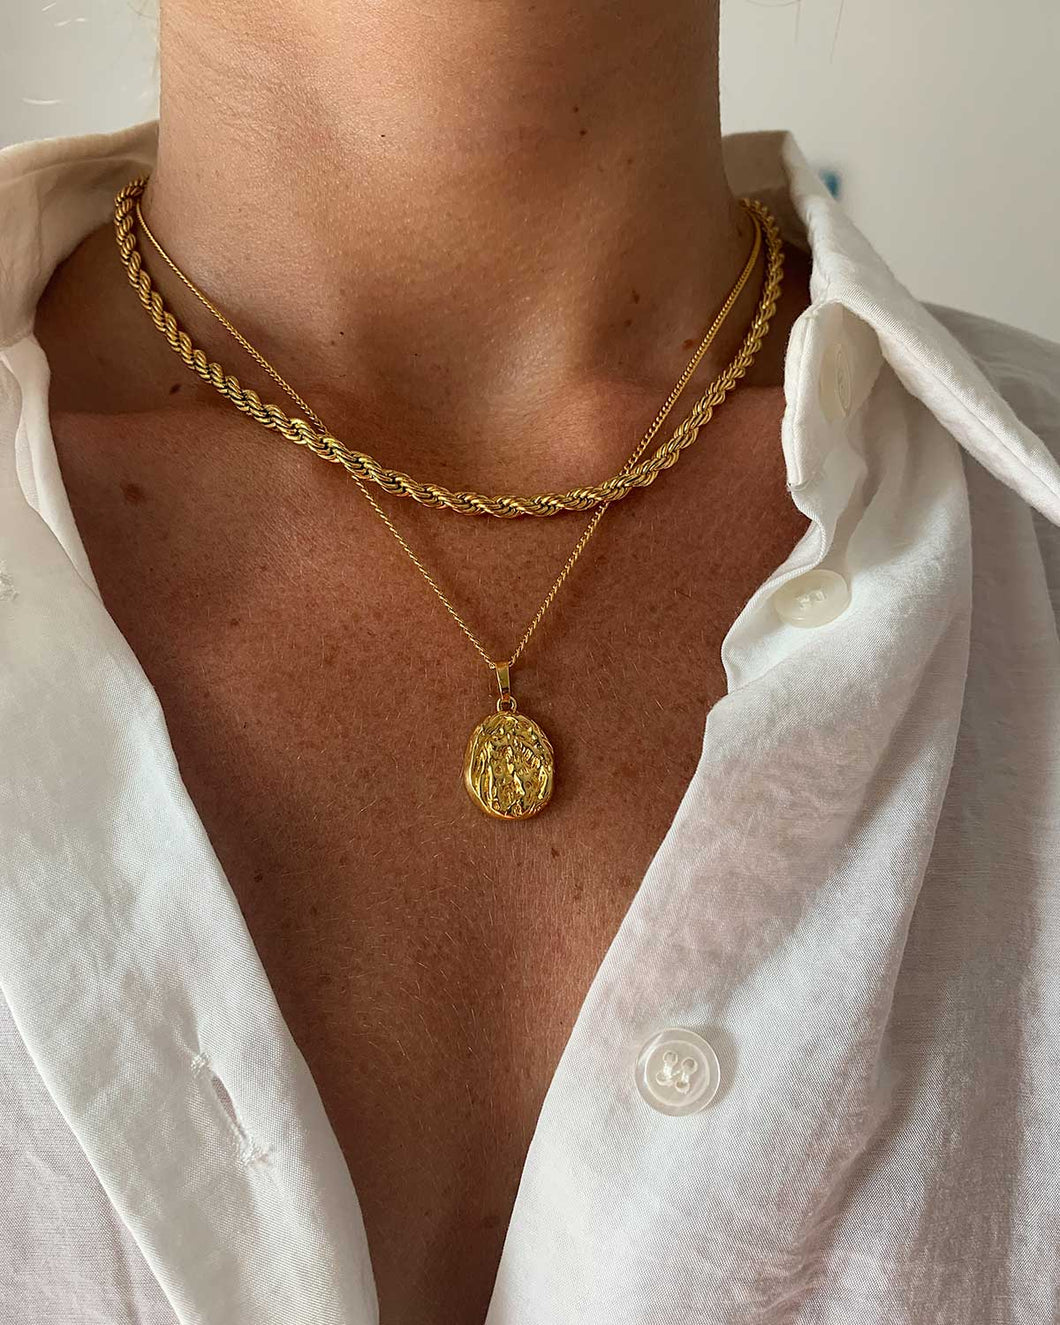 Enhance your necklace collection with this exquisite gold necklace featuring a coin pendant, perfect for layering or stacking with other pearl and gold necklaces.